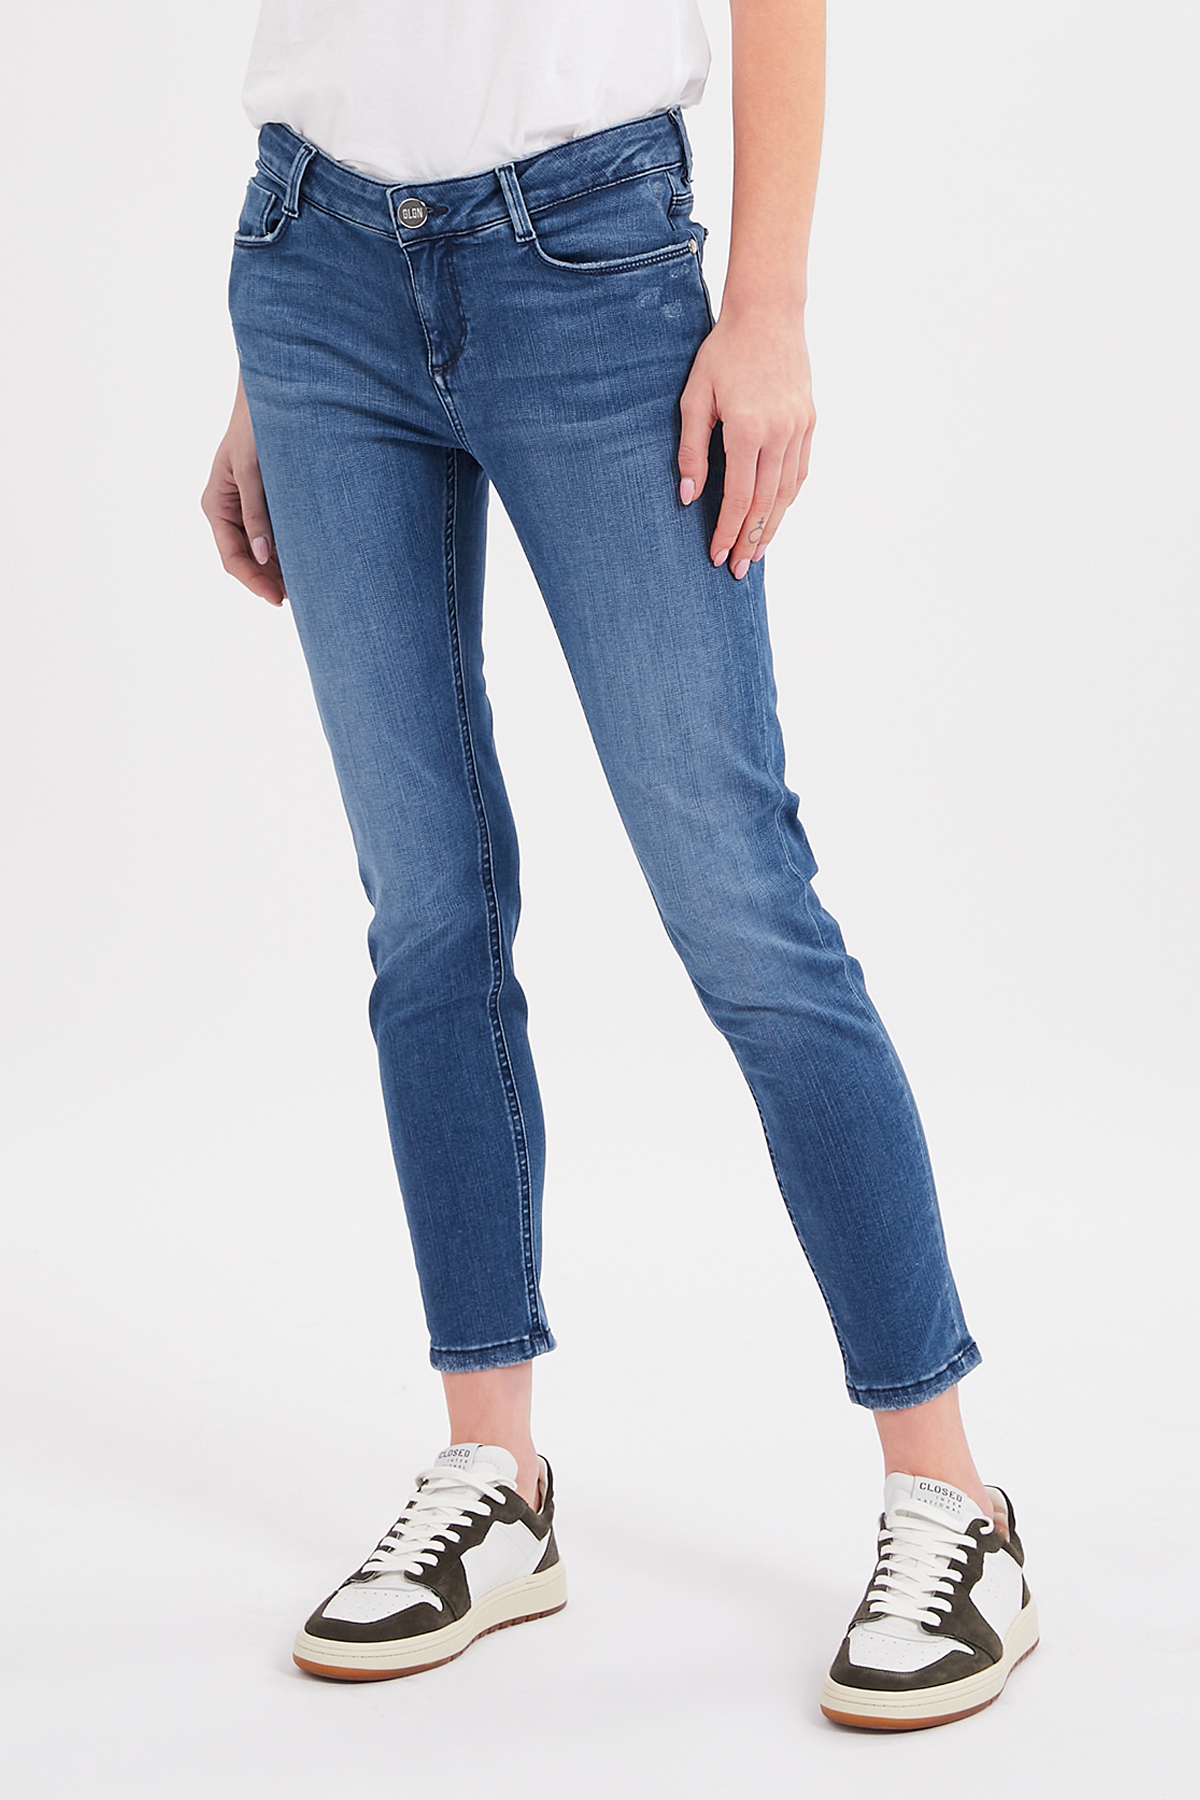 Mid-Rise Jeans Jungbusch Skinny Fit